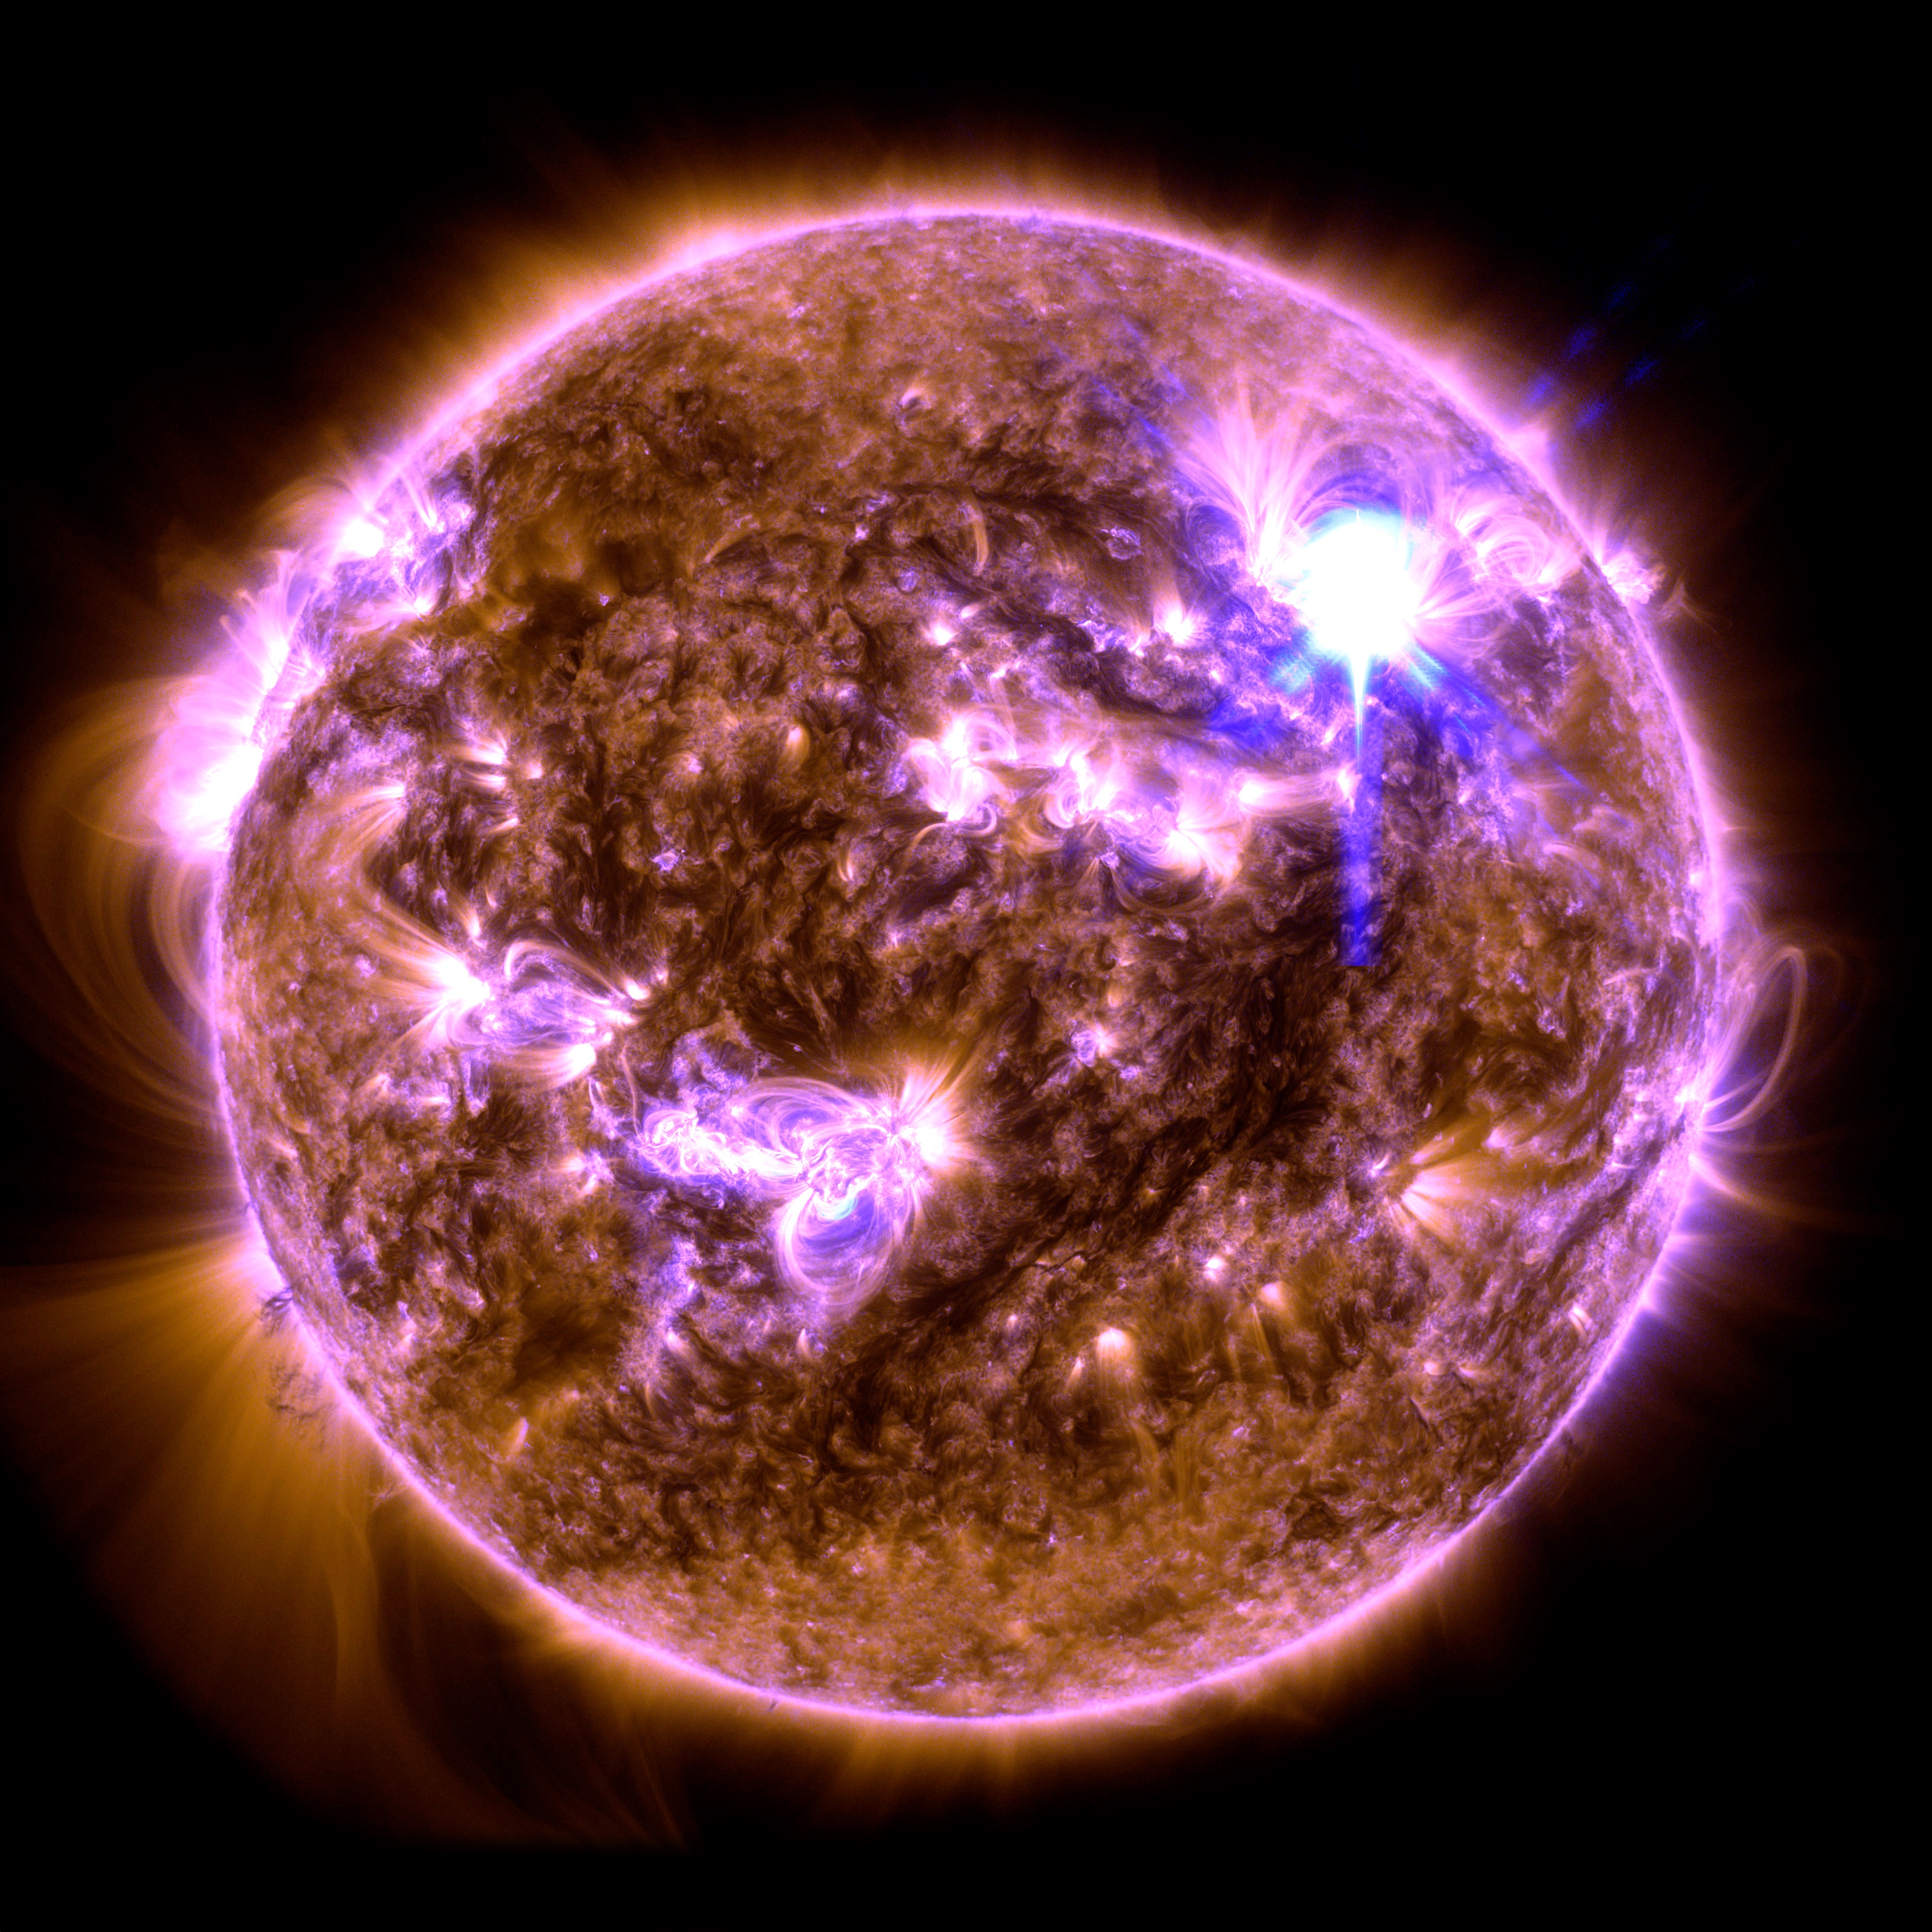 The Sun appears as a mottled orange orb, with several bright regions of swirling plasma appearing in pink and purple. A bright white flash of light appears in the upper right.